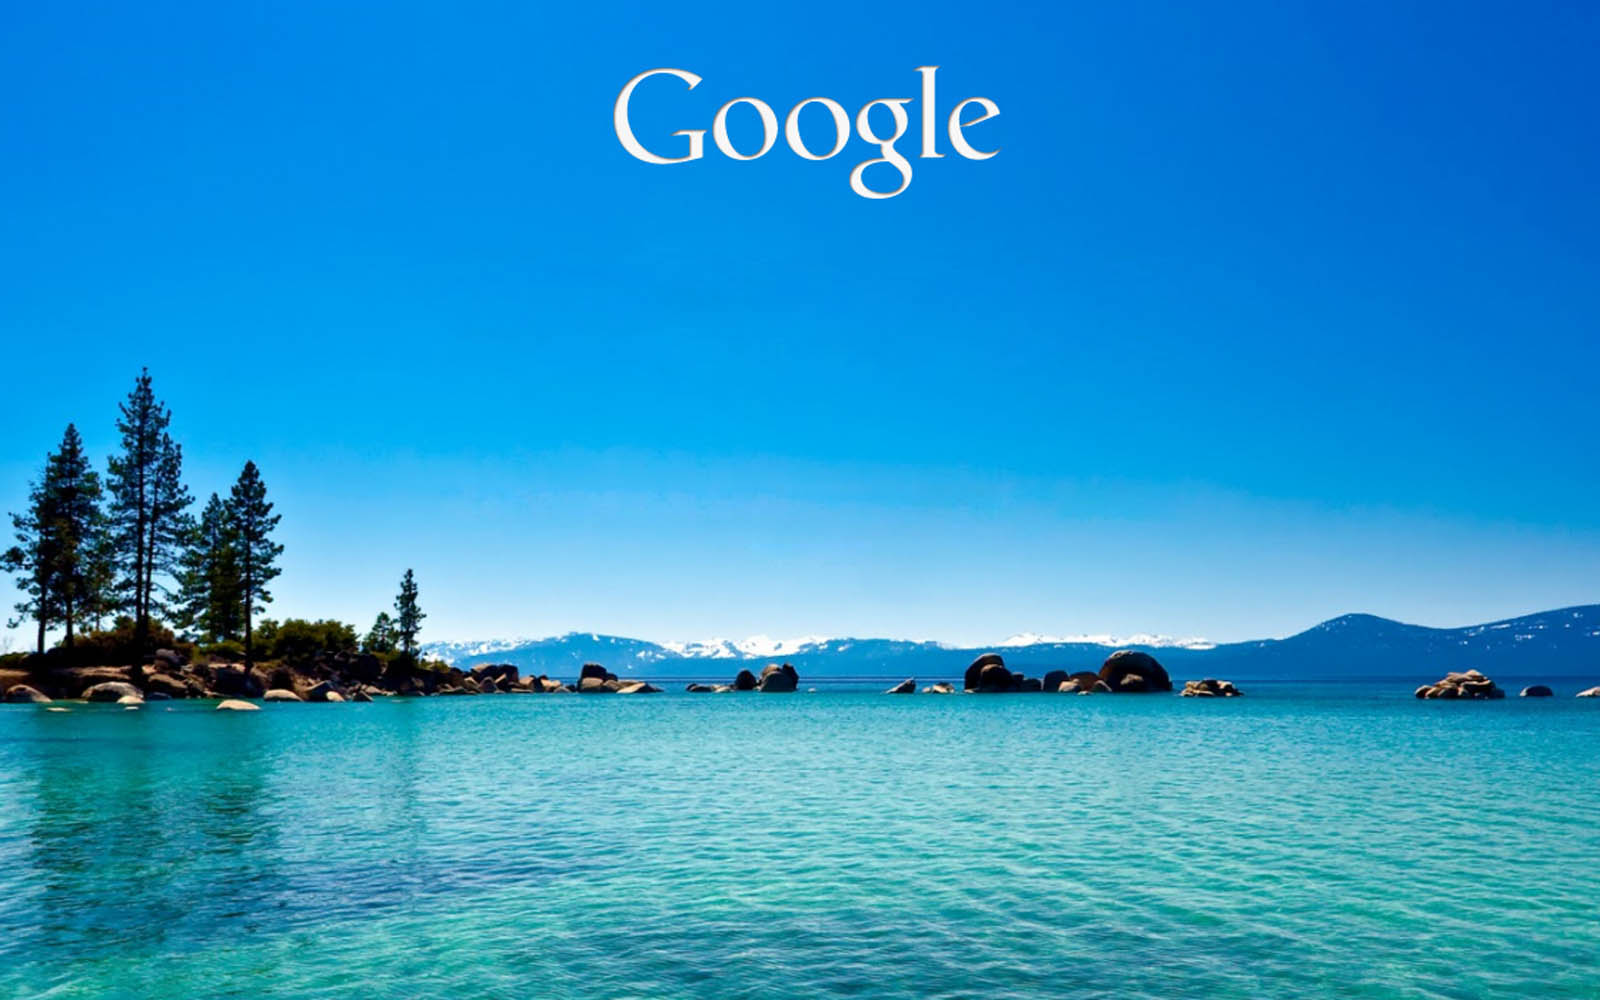 Tag Google Background Wallpaper Photos Pictures And Image For